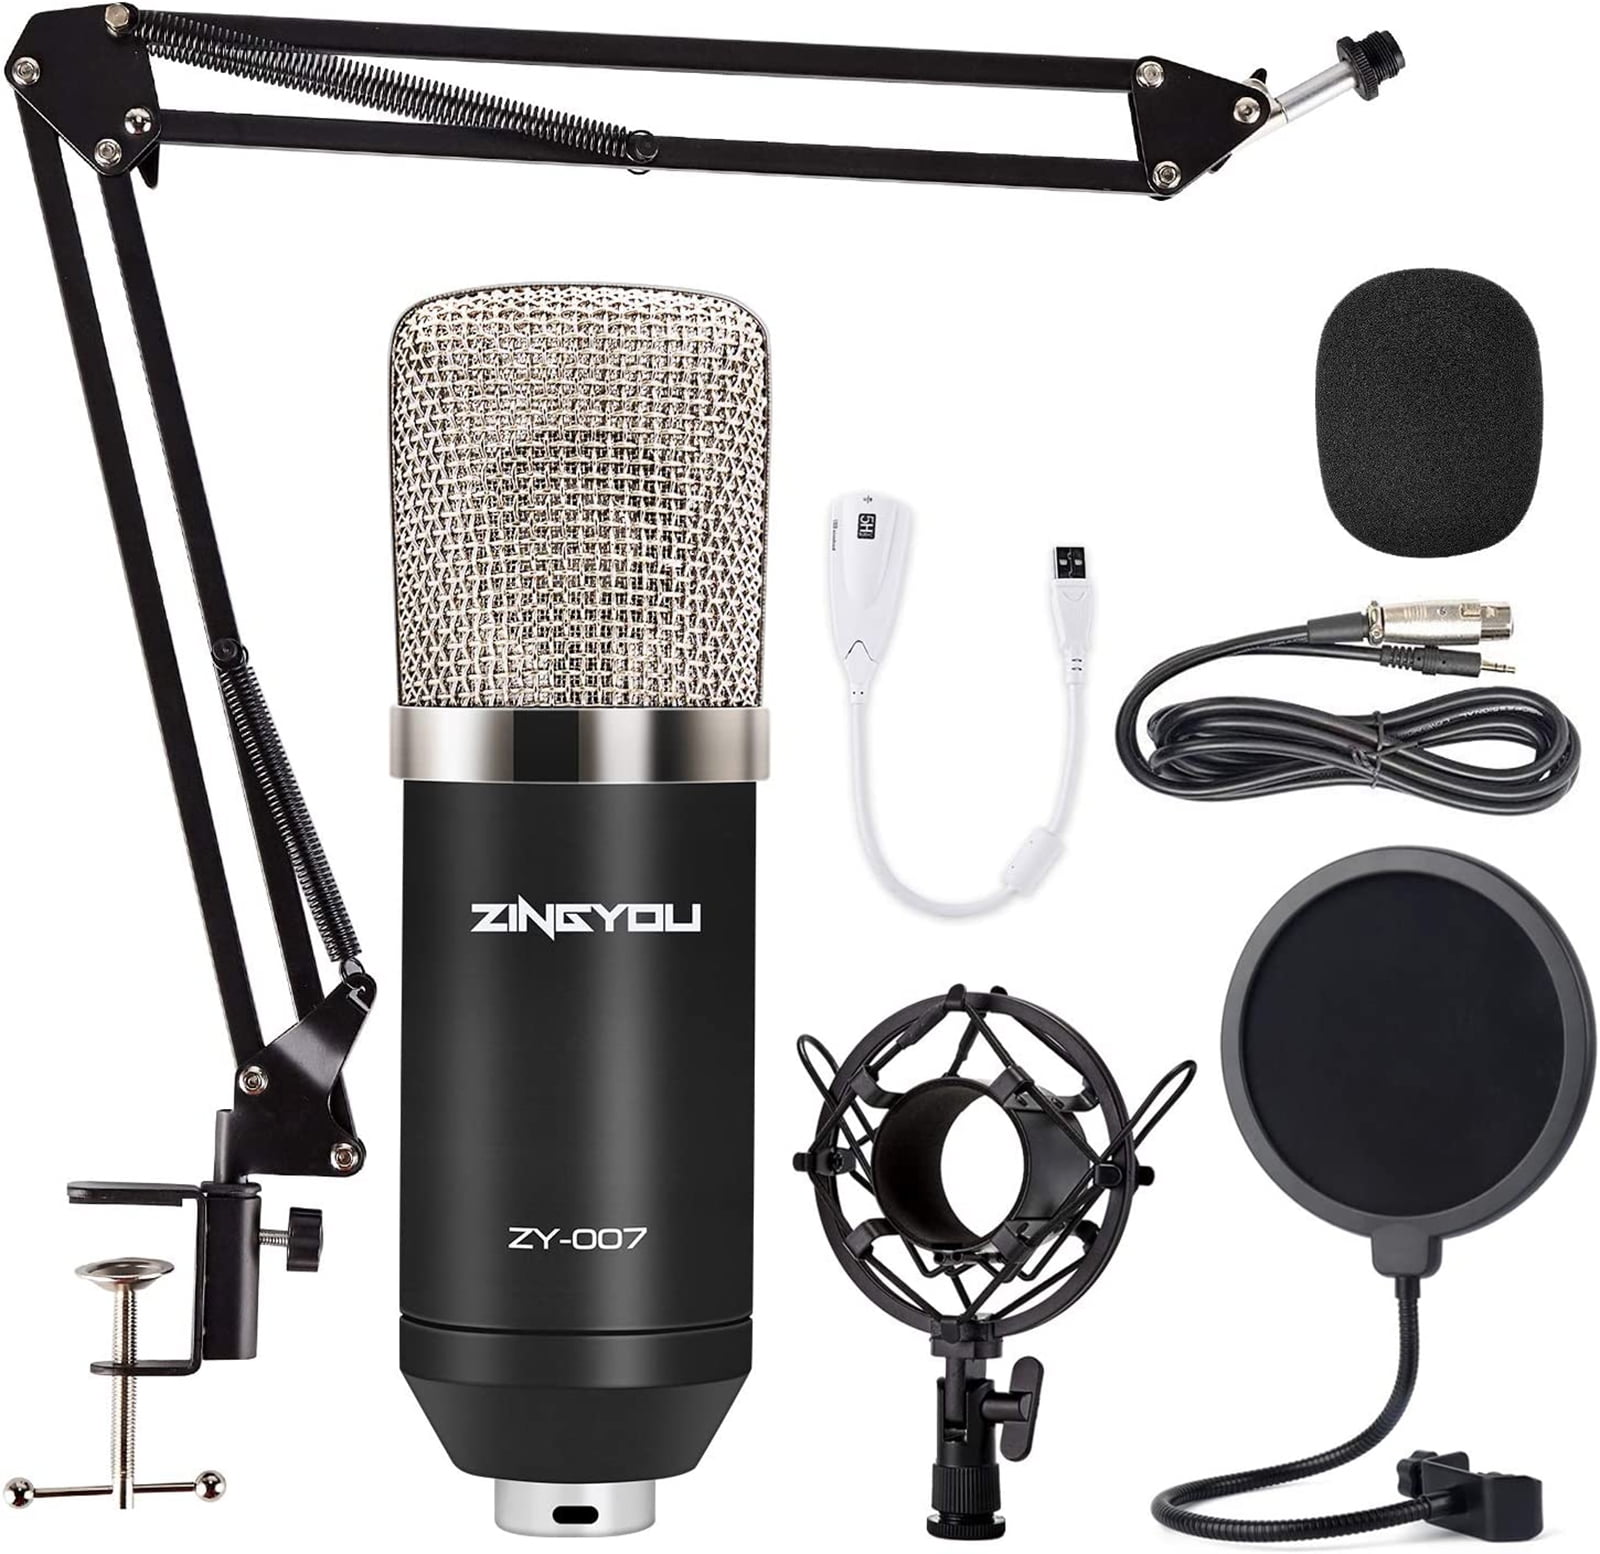 ZINGYOU ZY-007 Condenser Microphone Computer Recording for Streaming Cardioid Microphone Include Adjustable Arm Stand, Shock Mount and Pop Filter Silver - Walmart.com